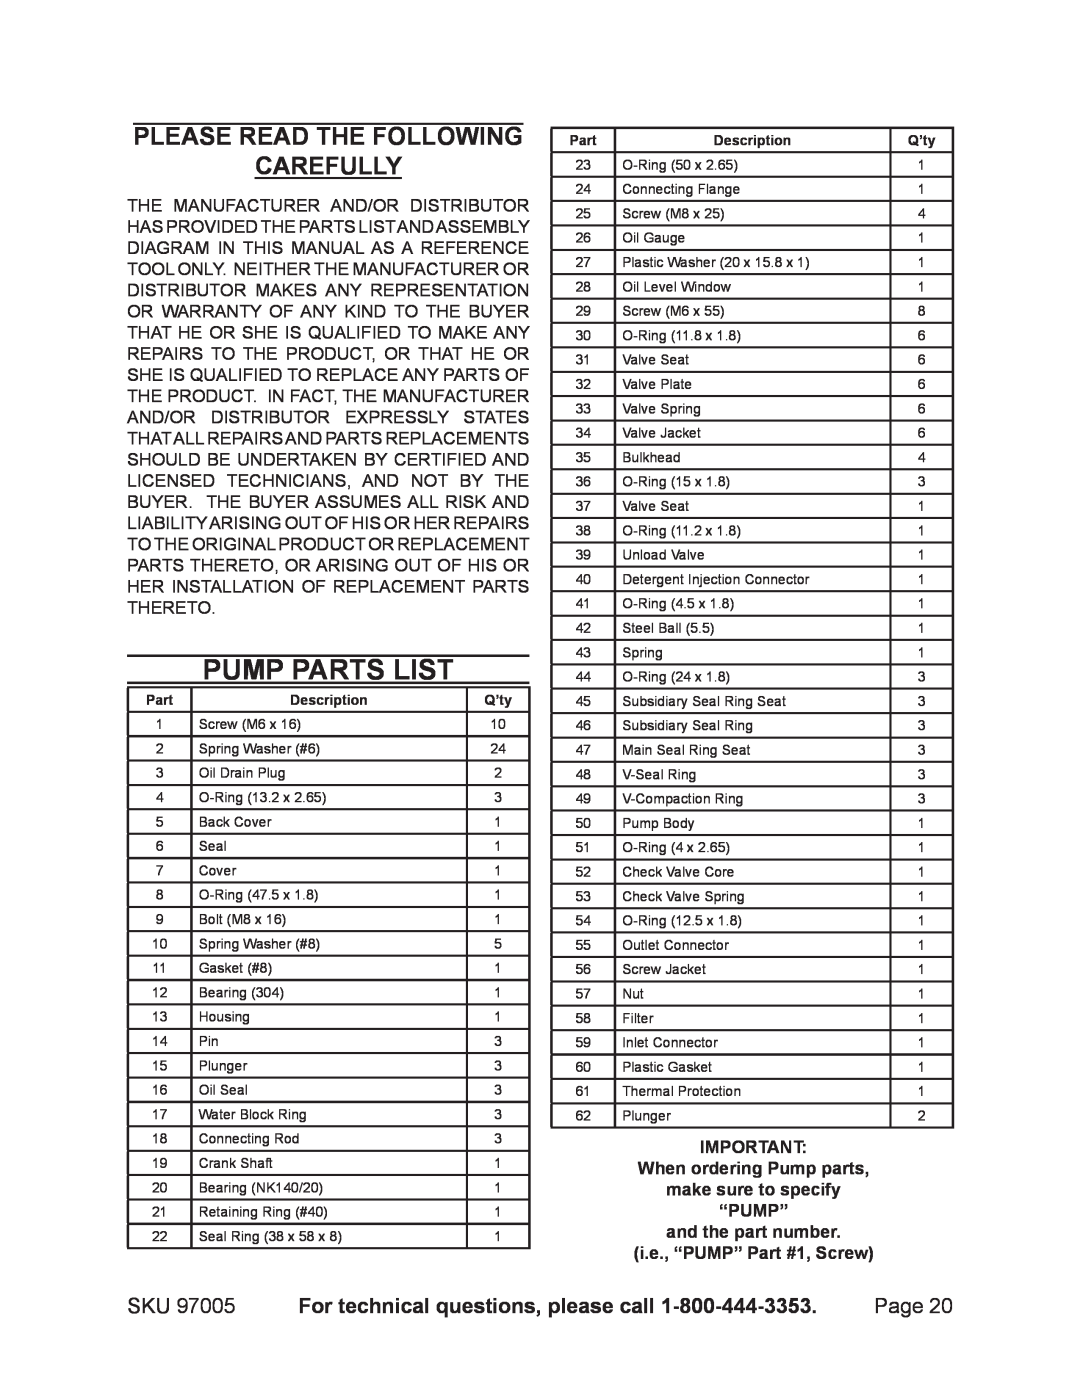 Harbor Freight Tools 97005 Pump Parts List, Please Read The Following Carefully, For technical questions, please call 